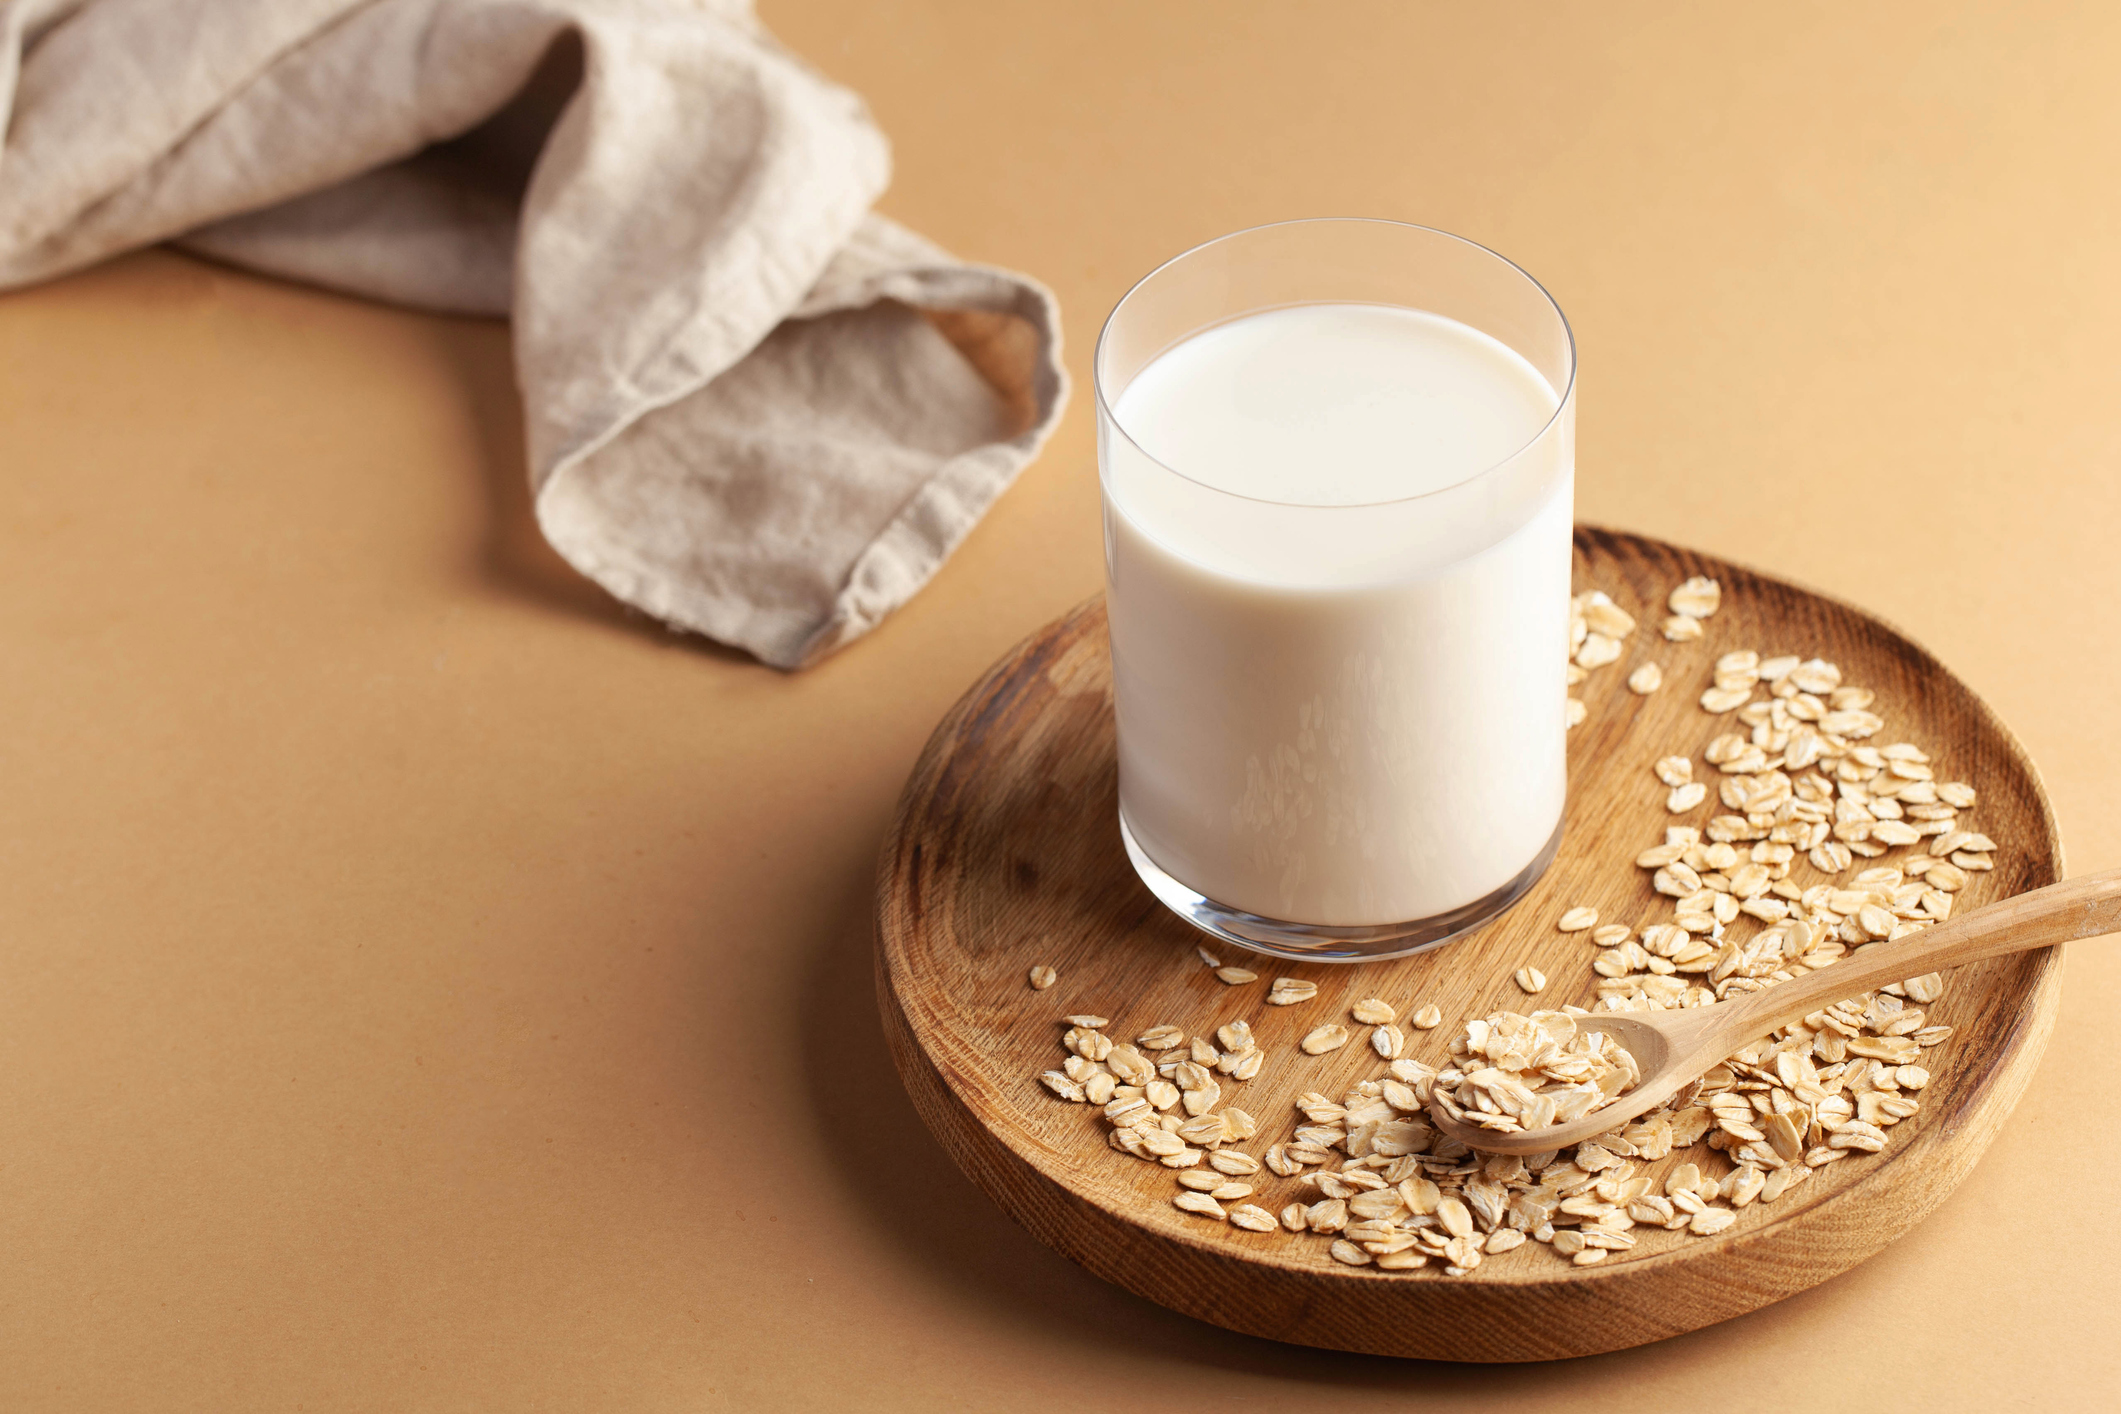 Oat milk in a glass surrounded by oats